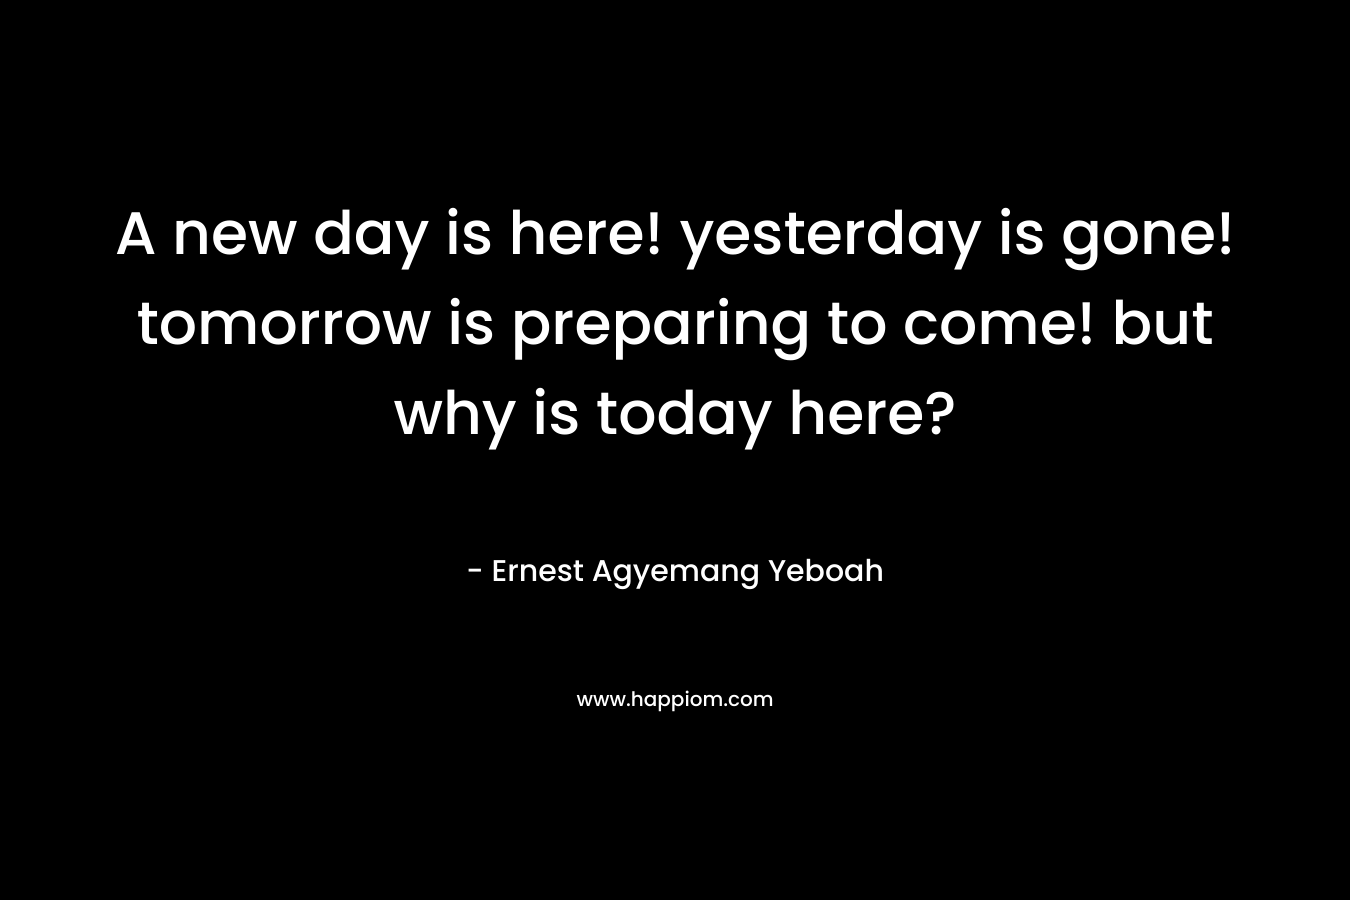 A new day is here! yesterday is gone! tomorrow is preparing to come! but why is today here?